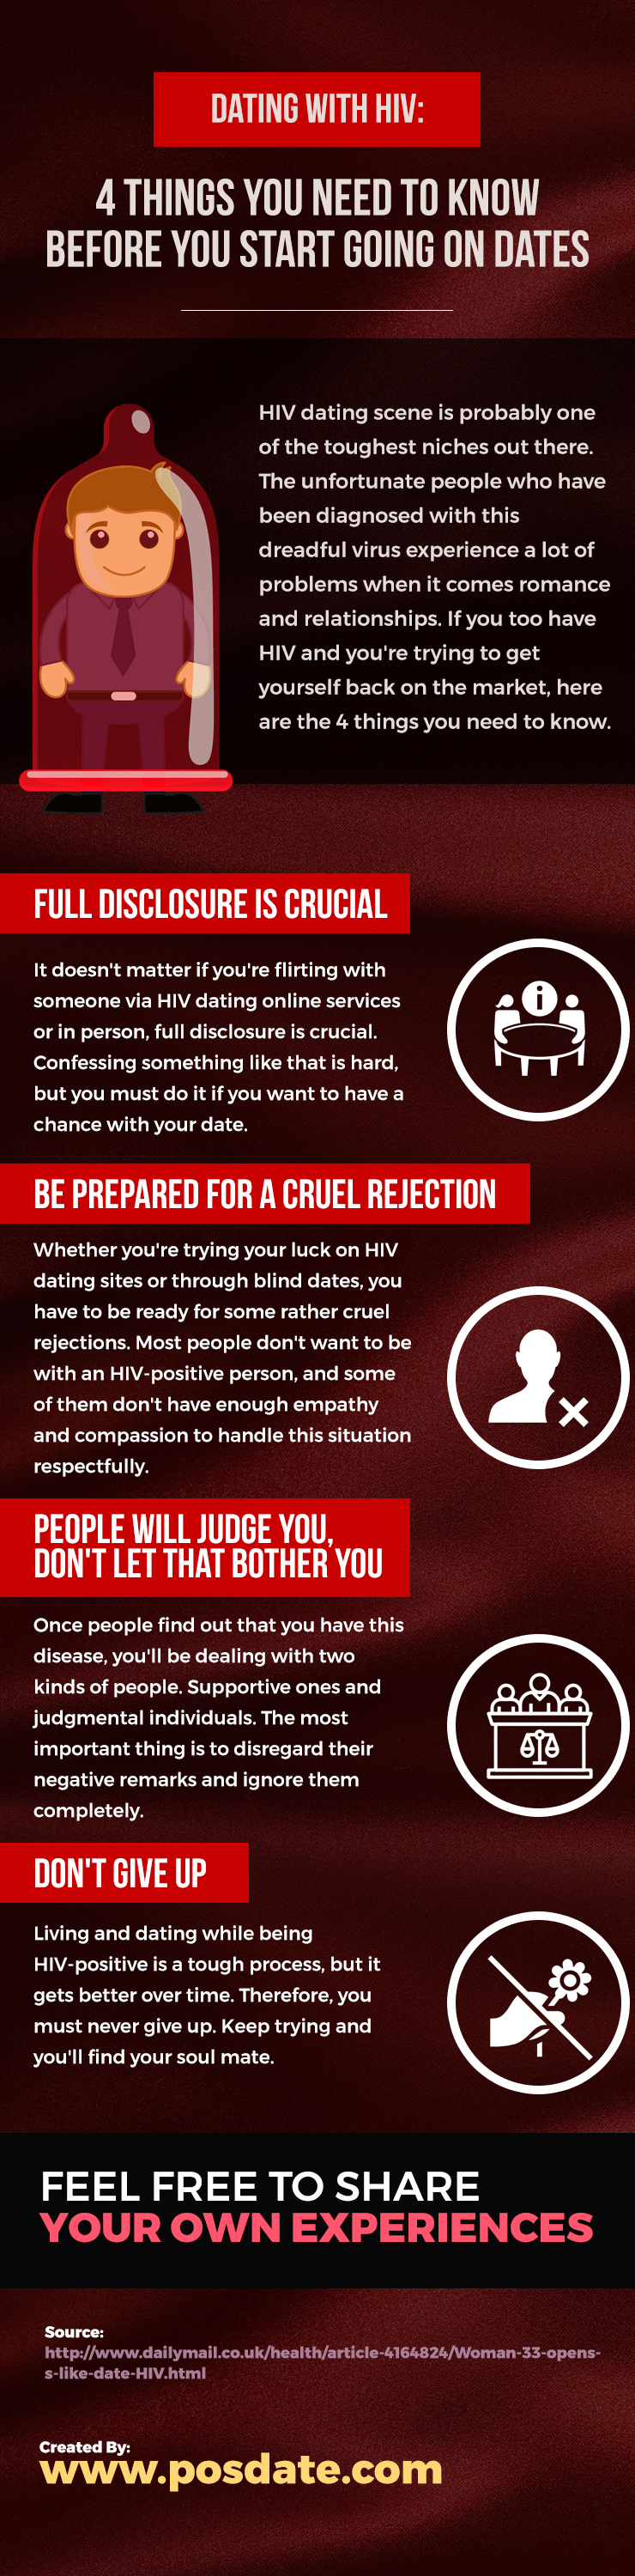 Dating With HIV 4 Things You Need To Know Before You Start Going On Dates